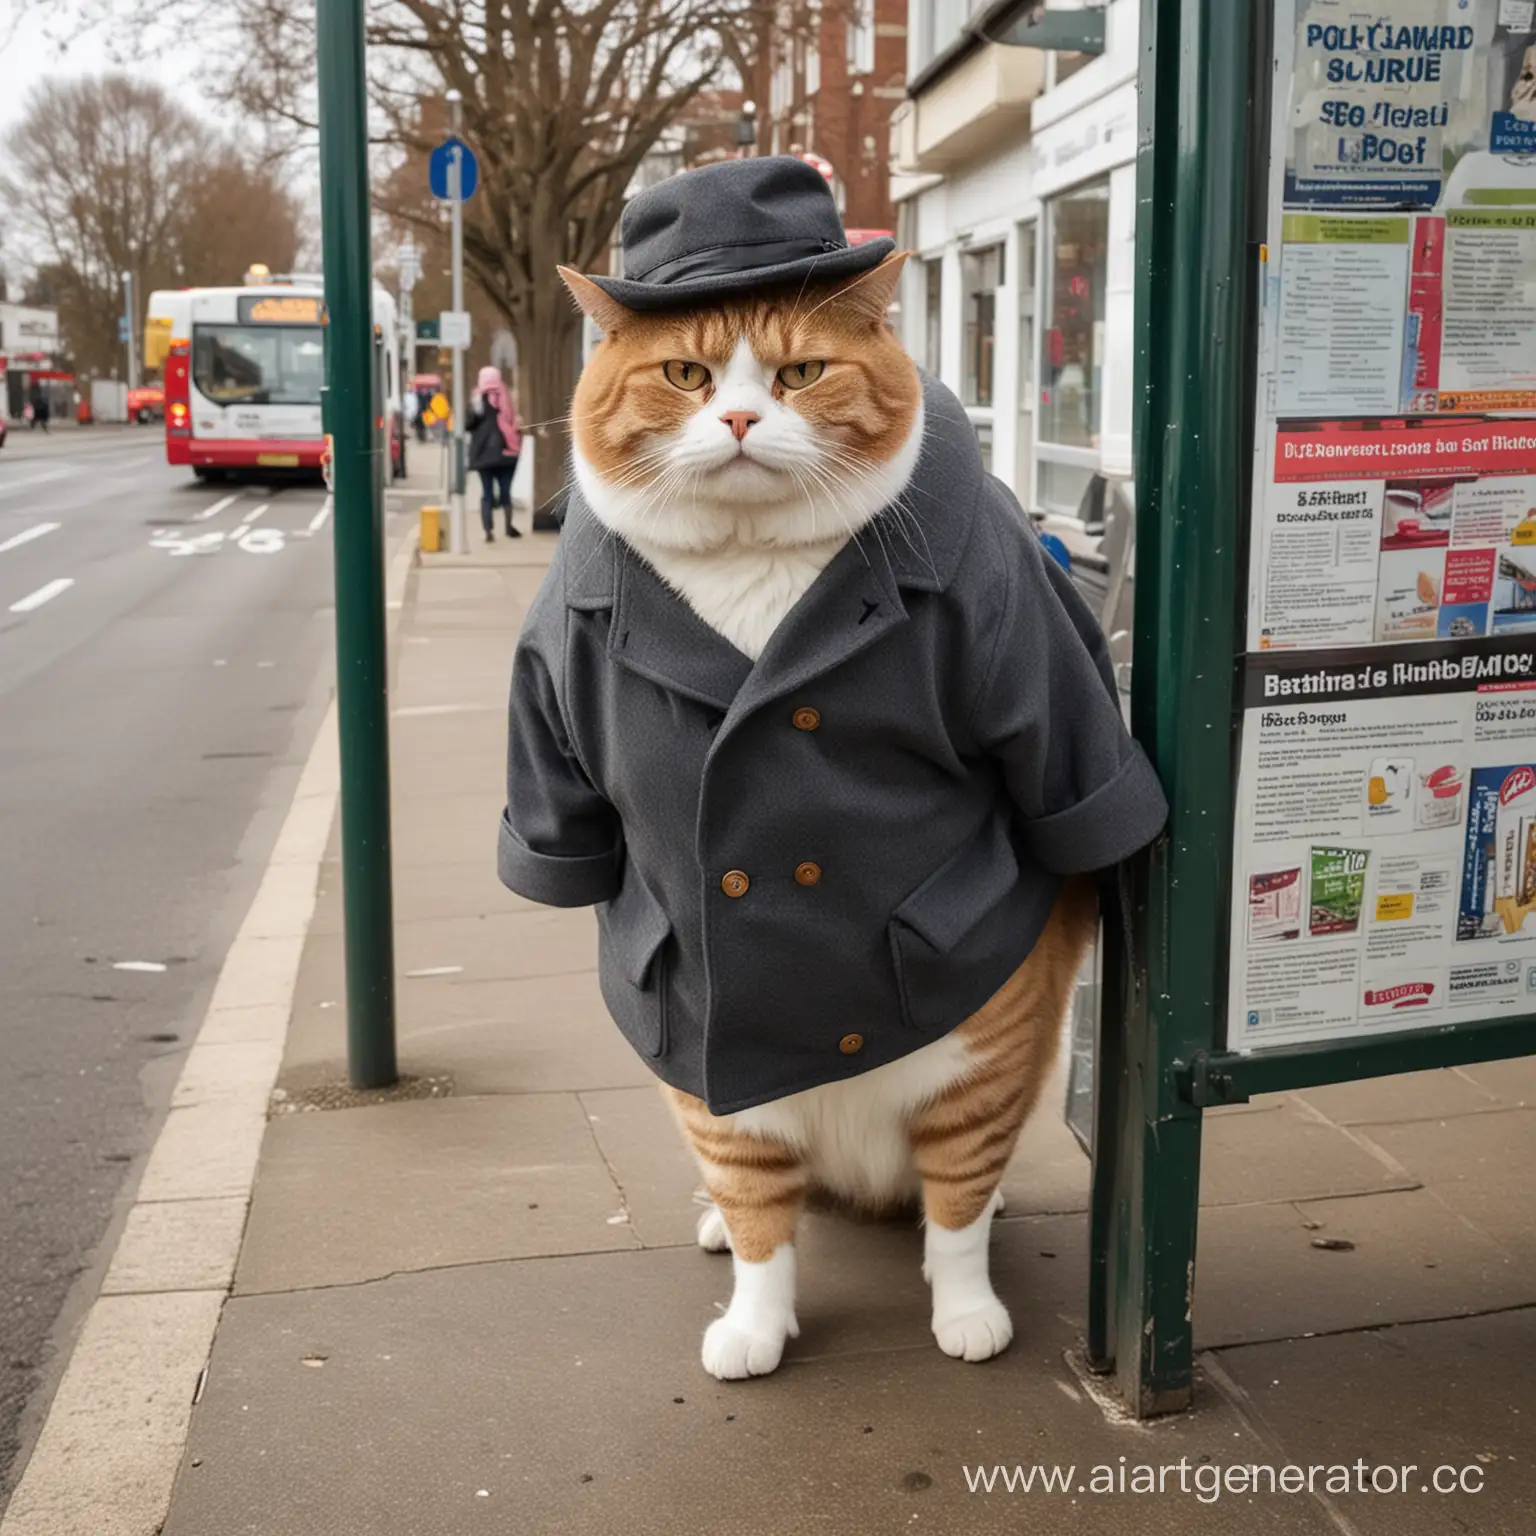 Chubby-Feline-Waiting-at-Bus-Stop-in-Dapper-Hat-and-Coat